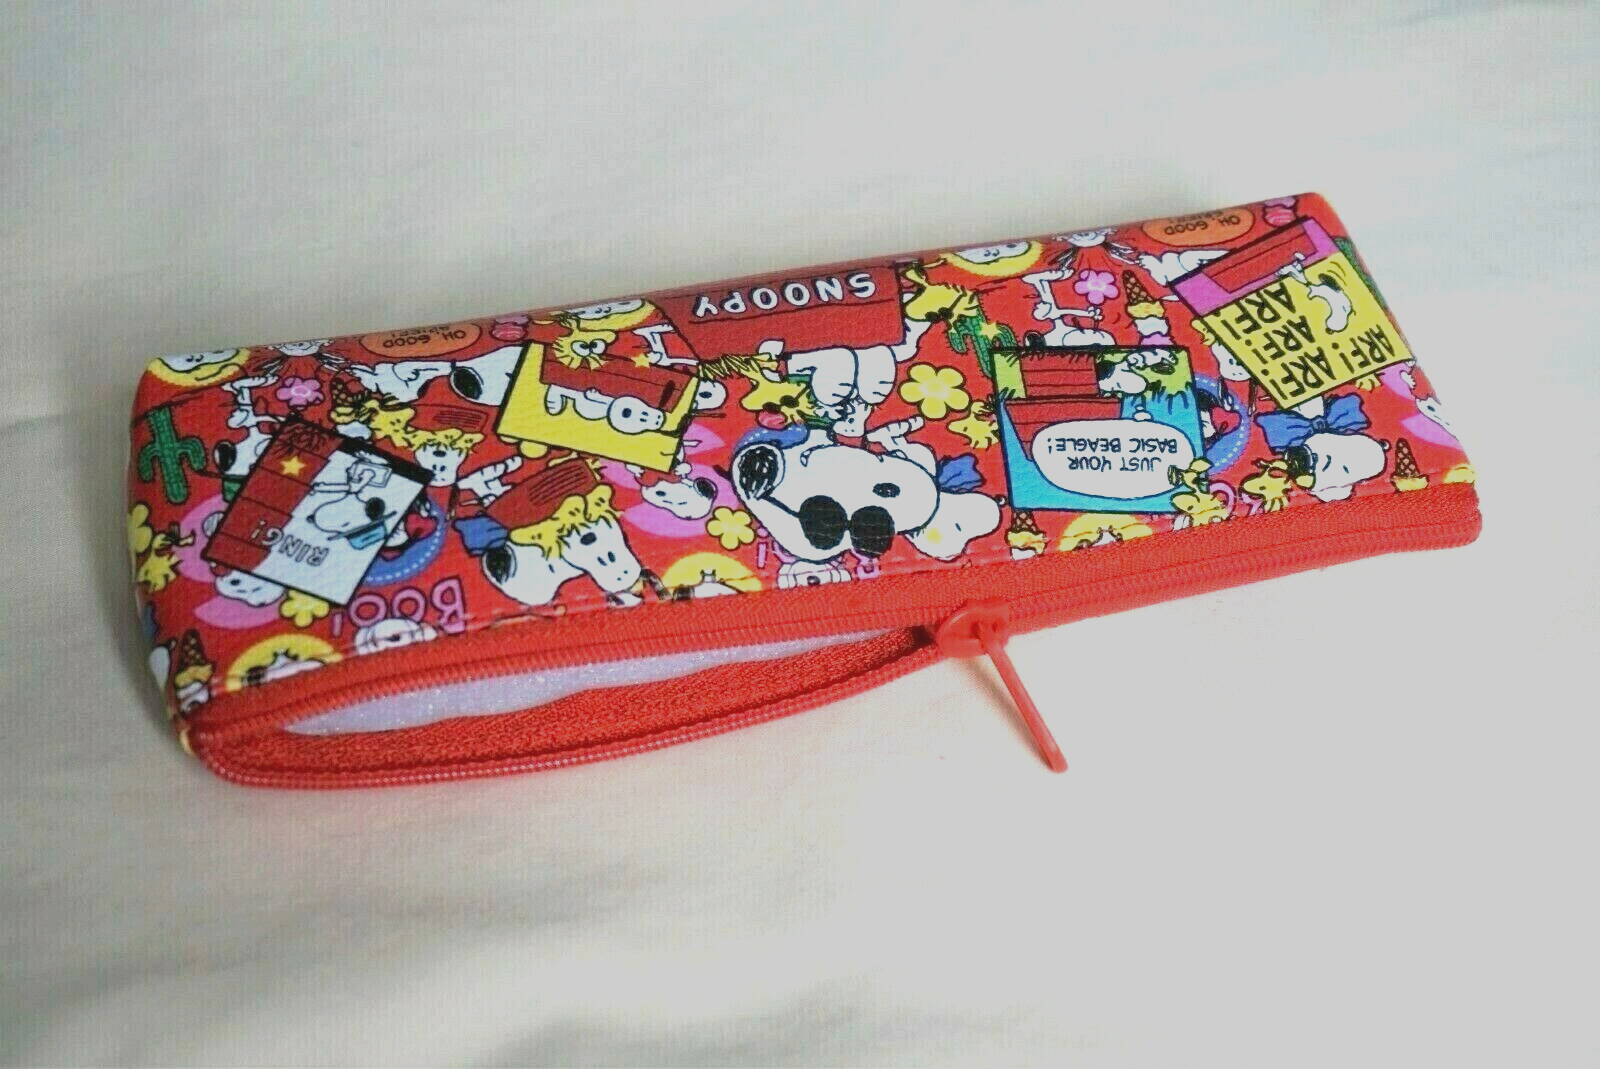 New Authentic Peanuts Japan Red Snoopy Basic Beagle Zipper Pen Case Pouch 7" - $3.91